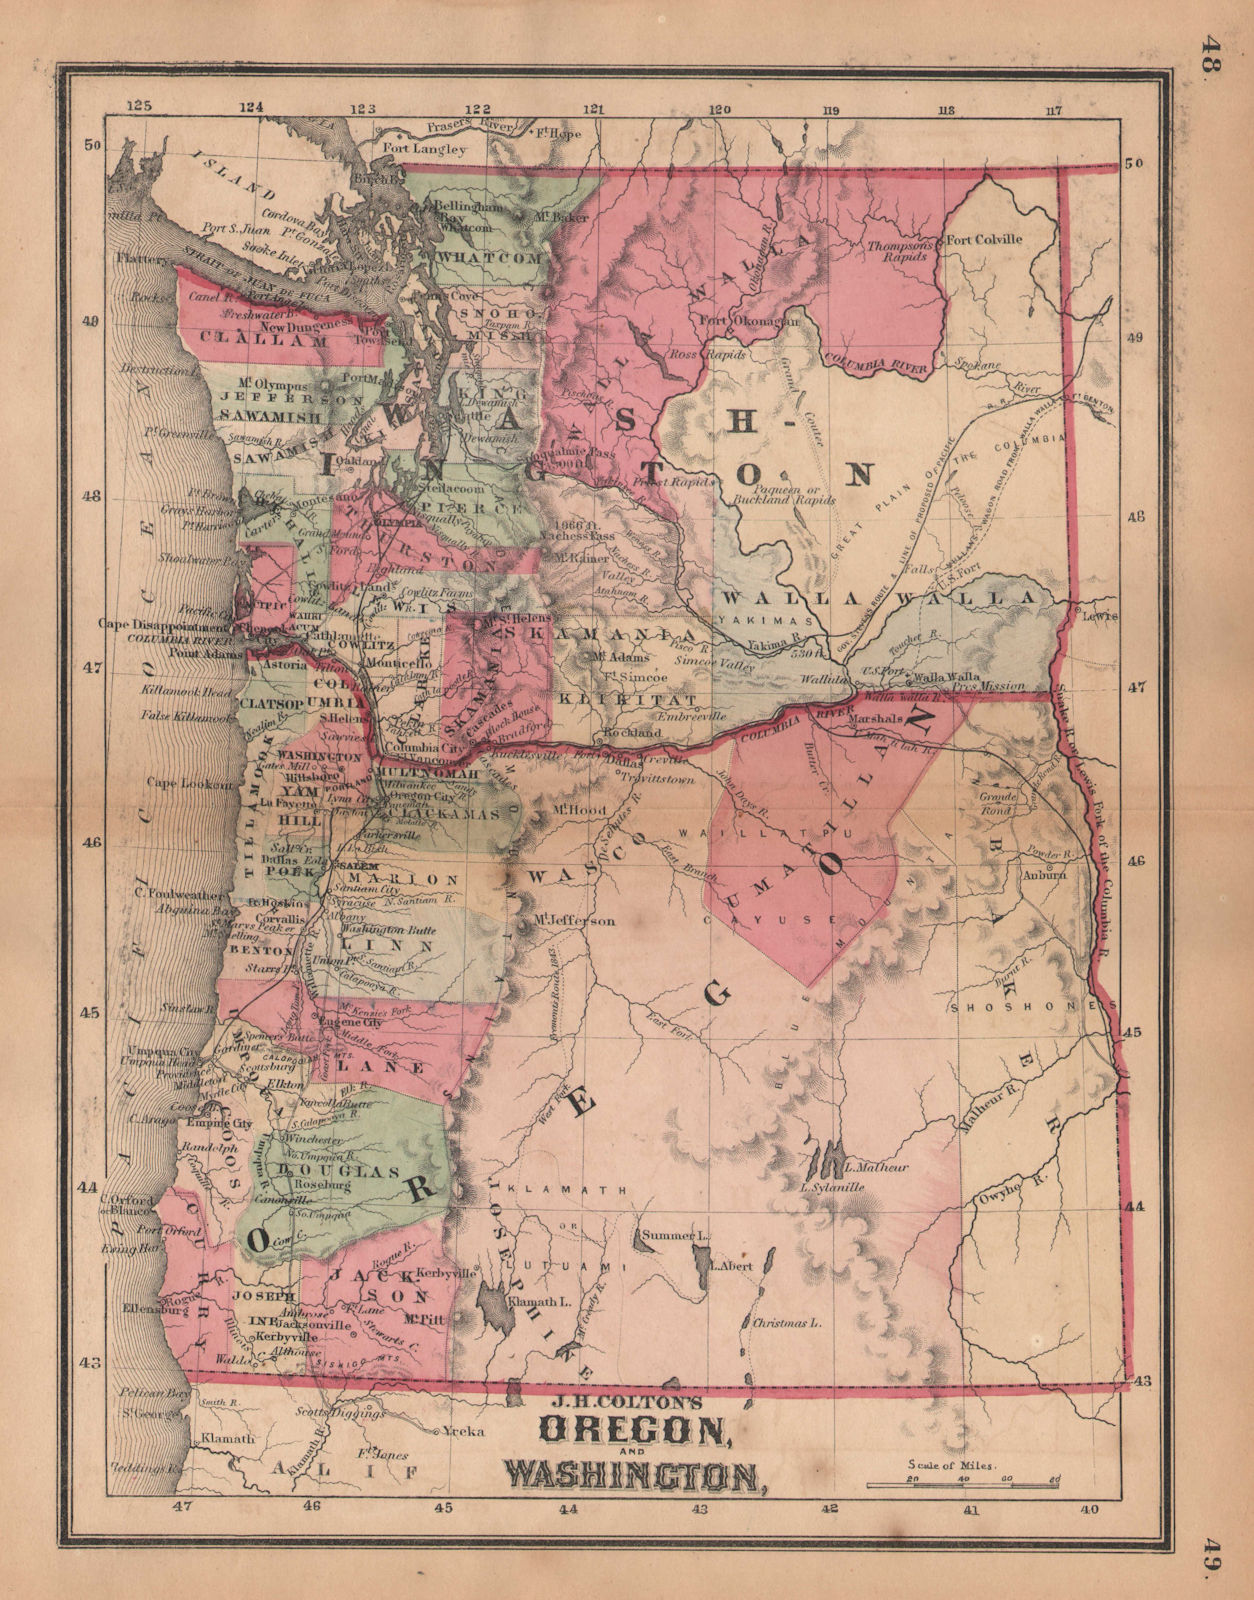 Associate Product J. H. Colton's map of Oregon and Washington 1864 old antique plan chart